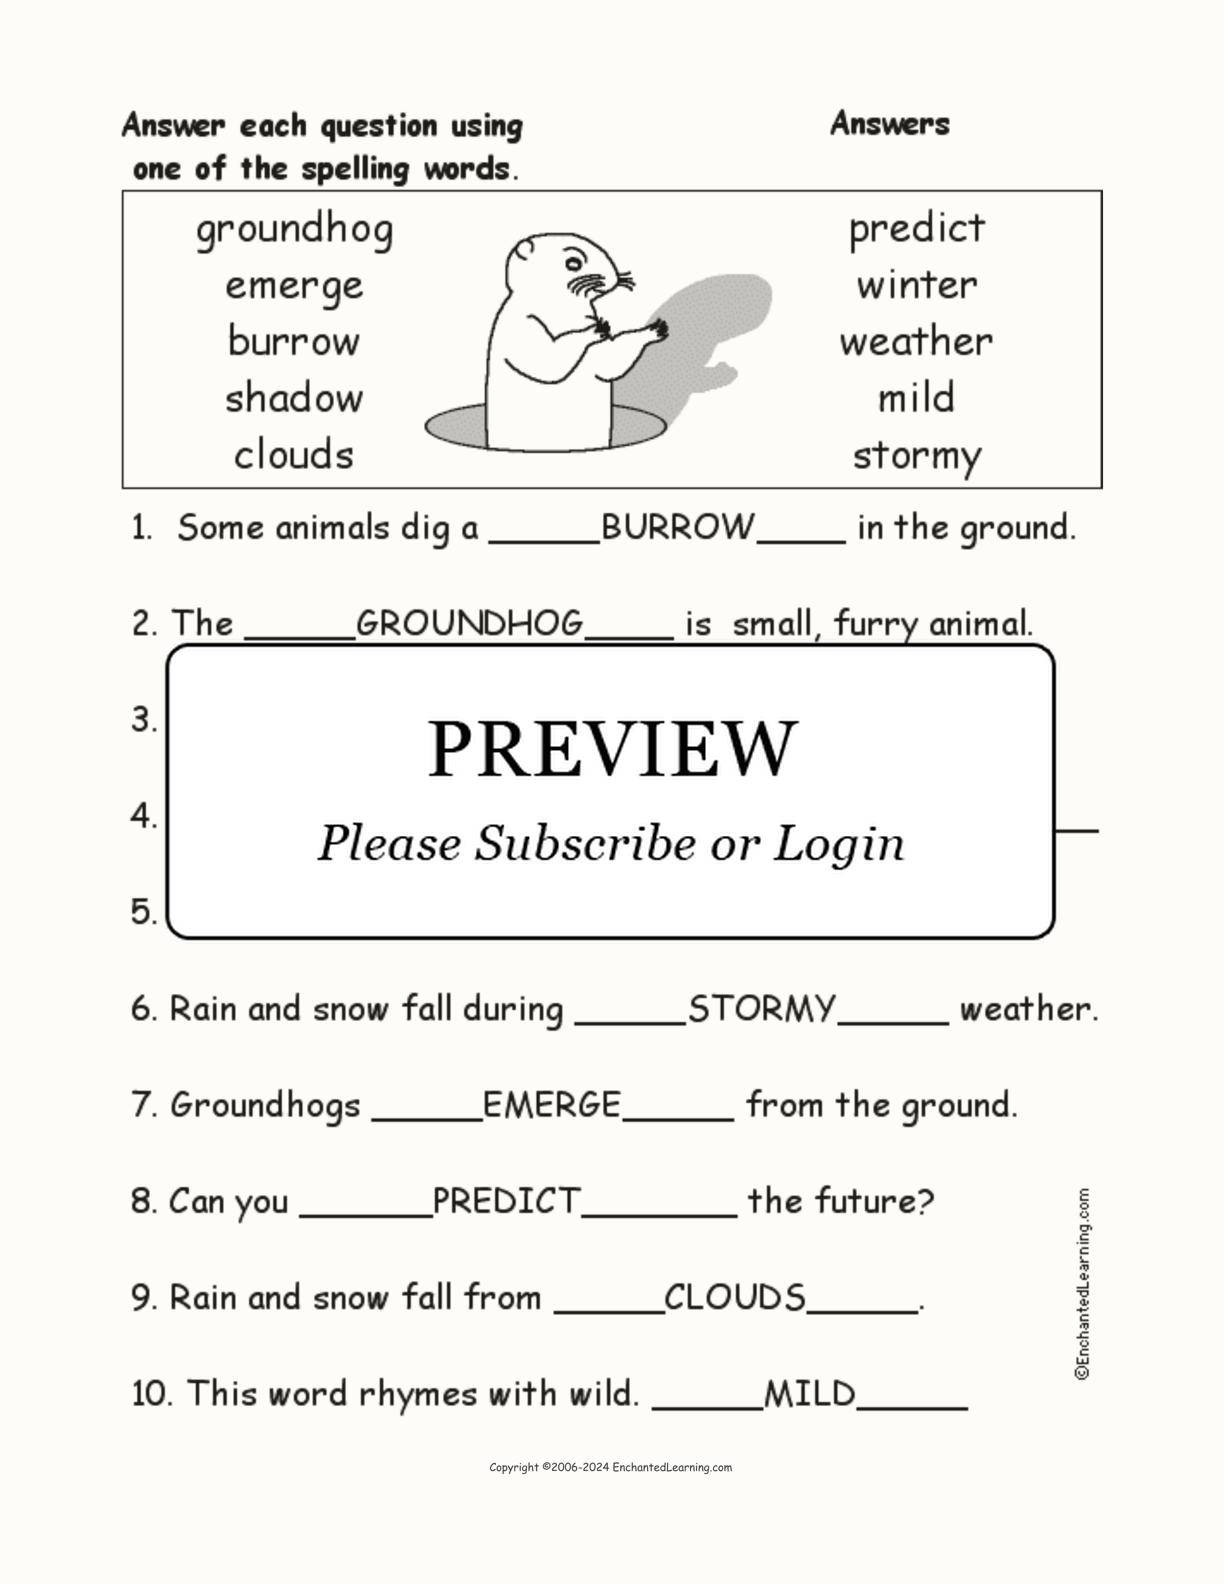 Groundhog Day Spelling Word Questions interactive worksheet page 2